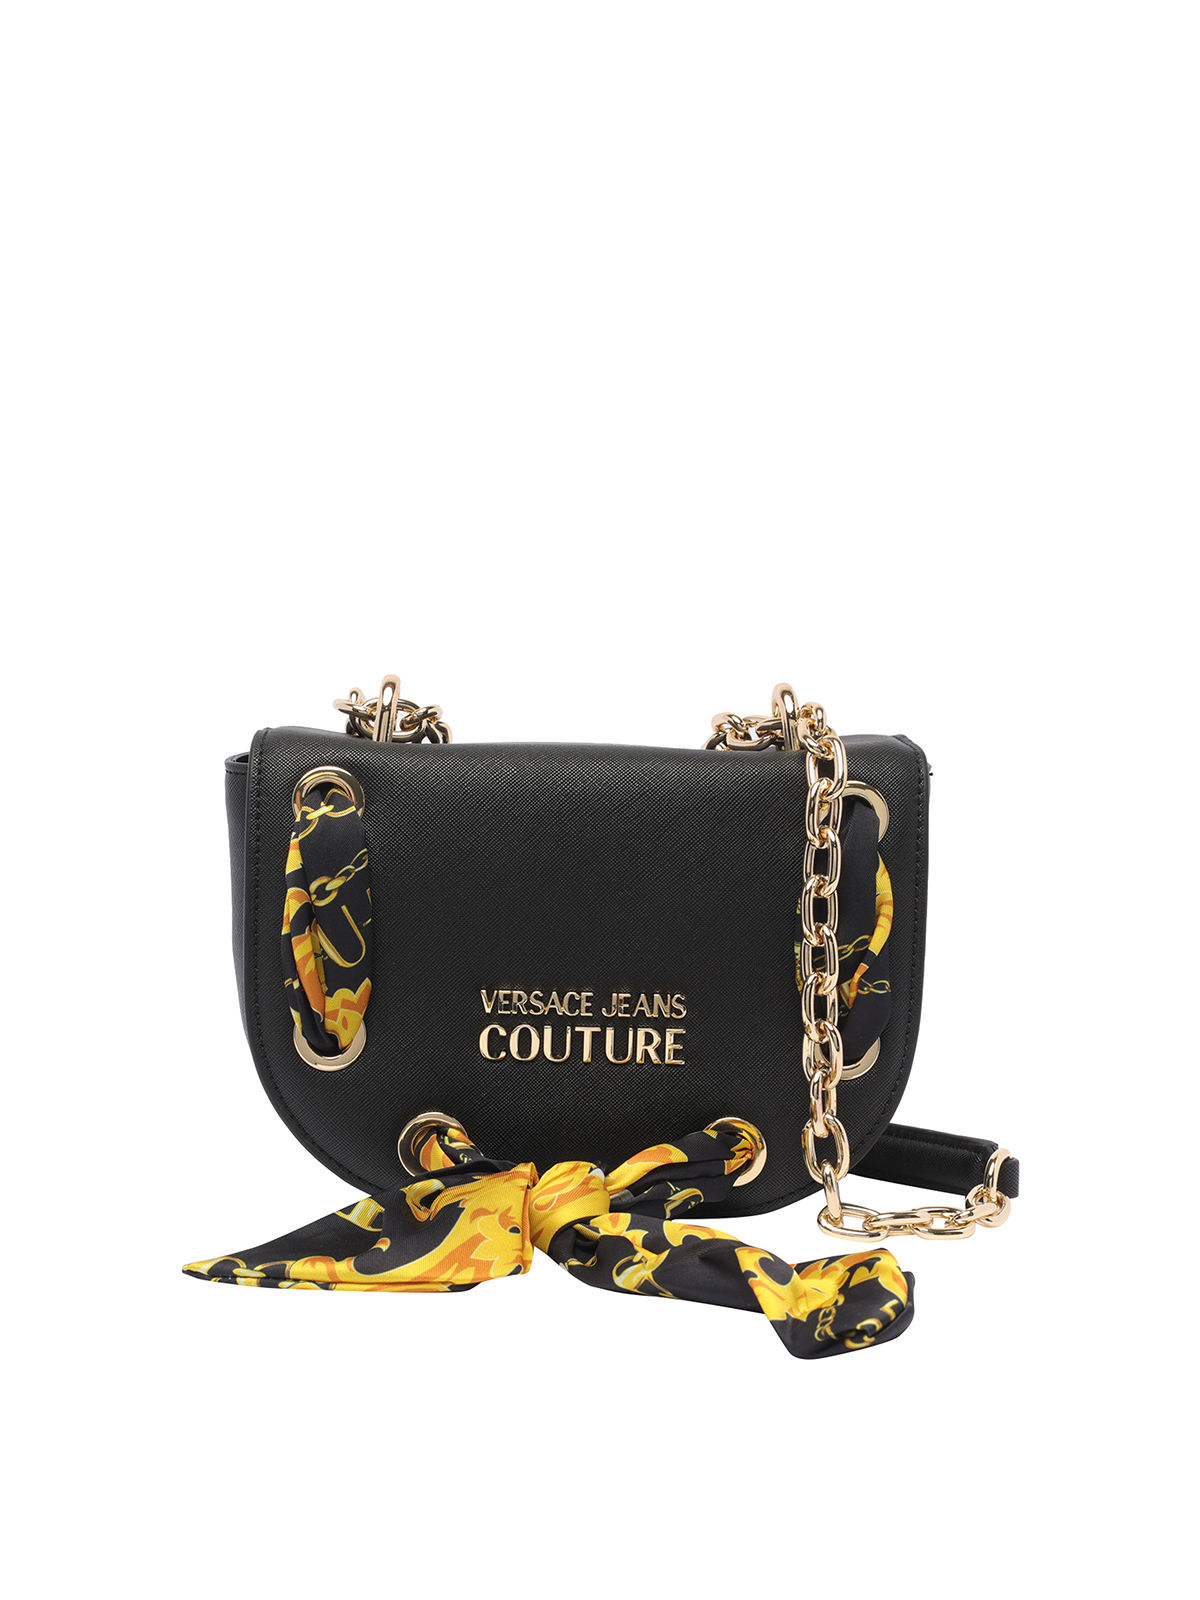 Versace Jeans Couture Shoulder Bag Chain Couture 1 In Black